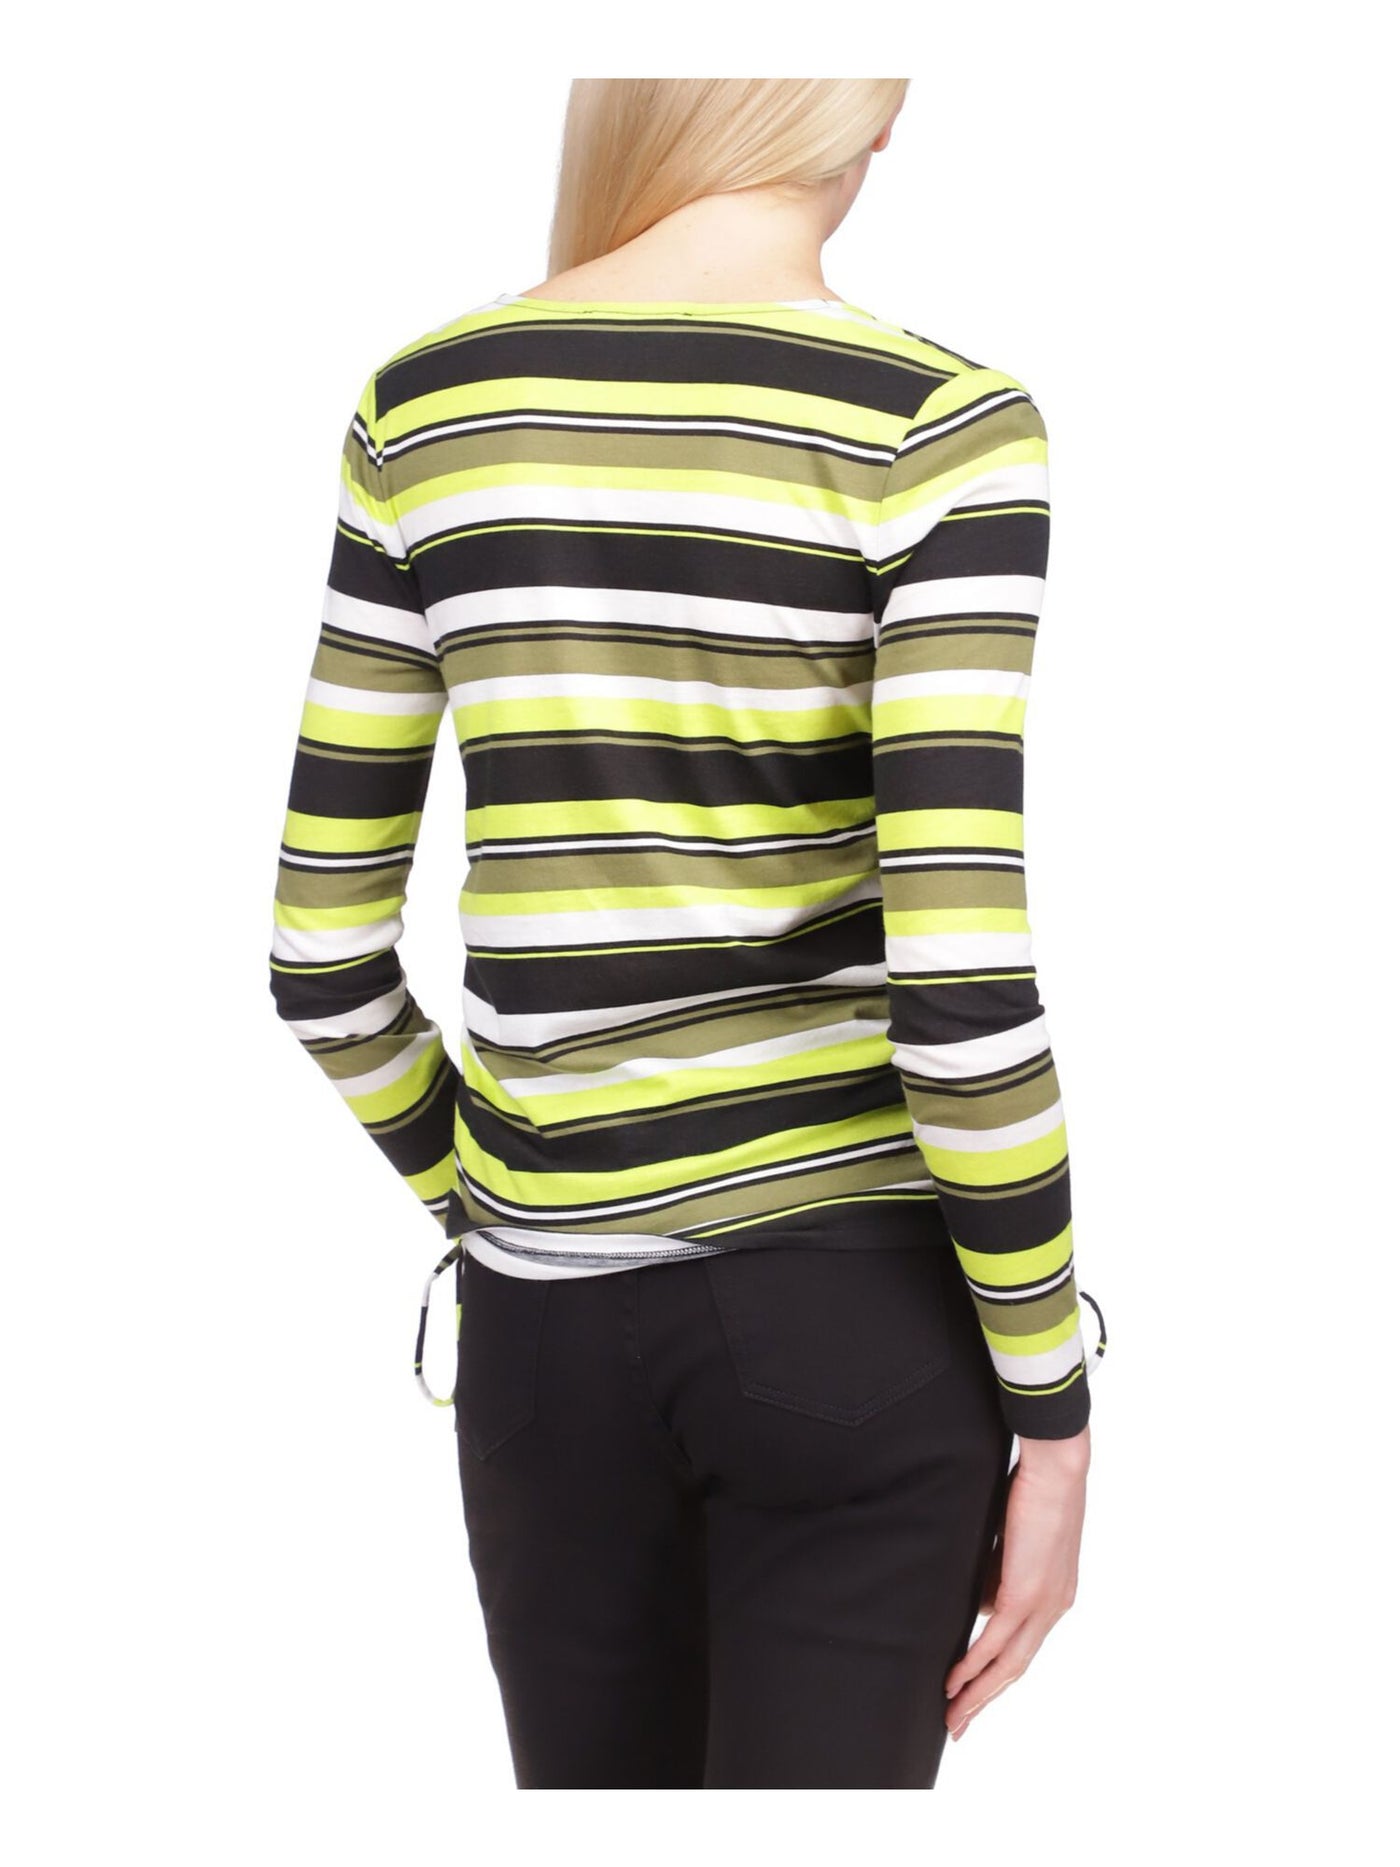 MICHAEL KORS Womens Green Ruched Tie Pullover Striped Long Sleeve V Neck Top M